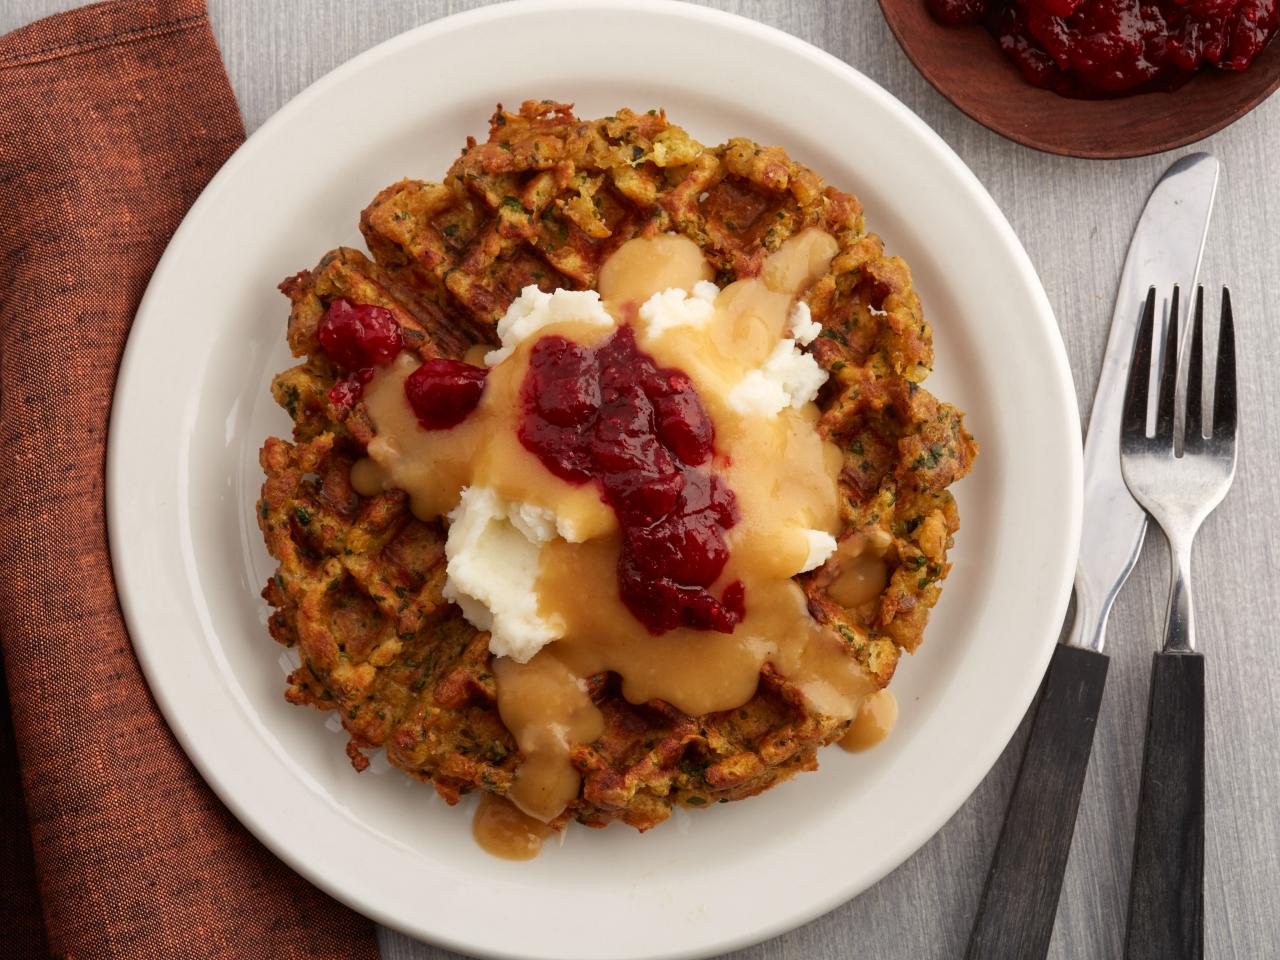 Presto Appliances on X: Do you have leftover turkey, stuffing, and  cranberries from your Thanksgiving feast? Turn them into stuffed waffles  with the Presto® Stuffler™ stuffed waffle maker.   There's no better